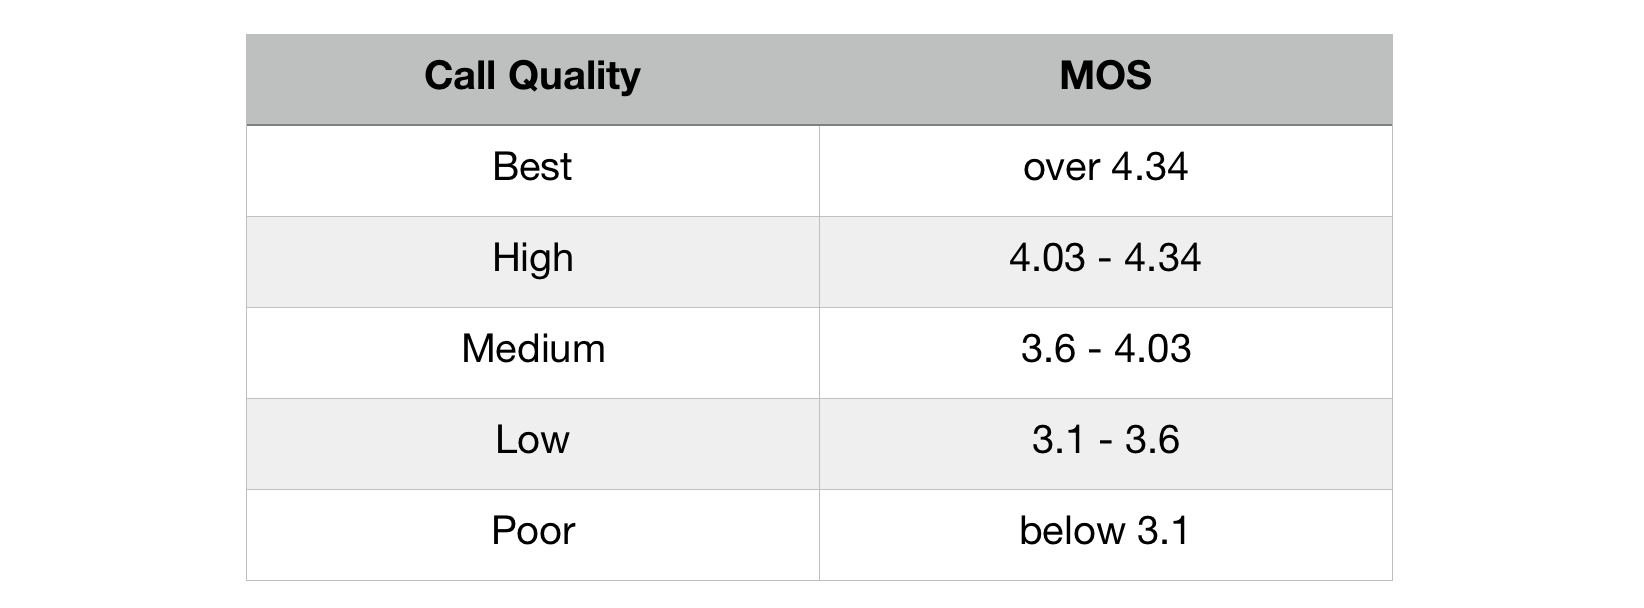 VoIP Quality Table - Measuring VoIP Quality with MOS Score